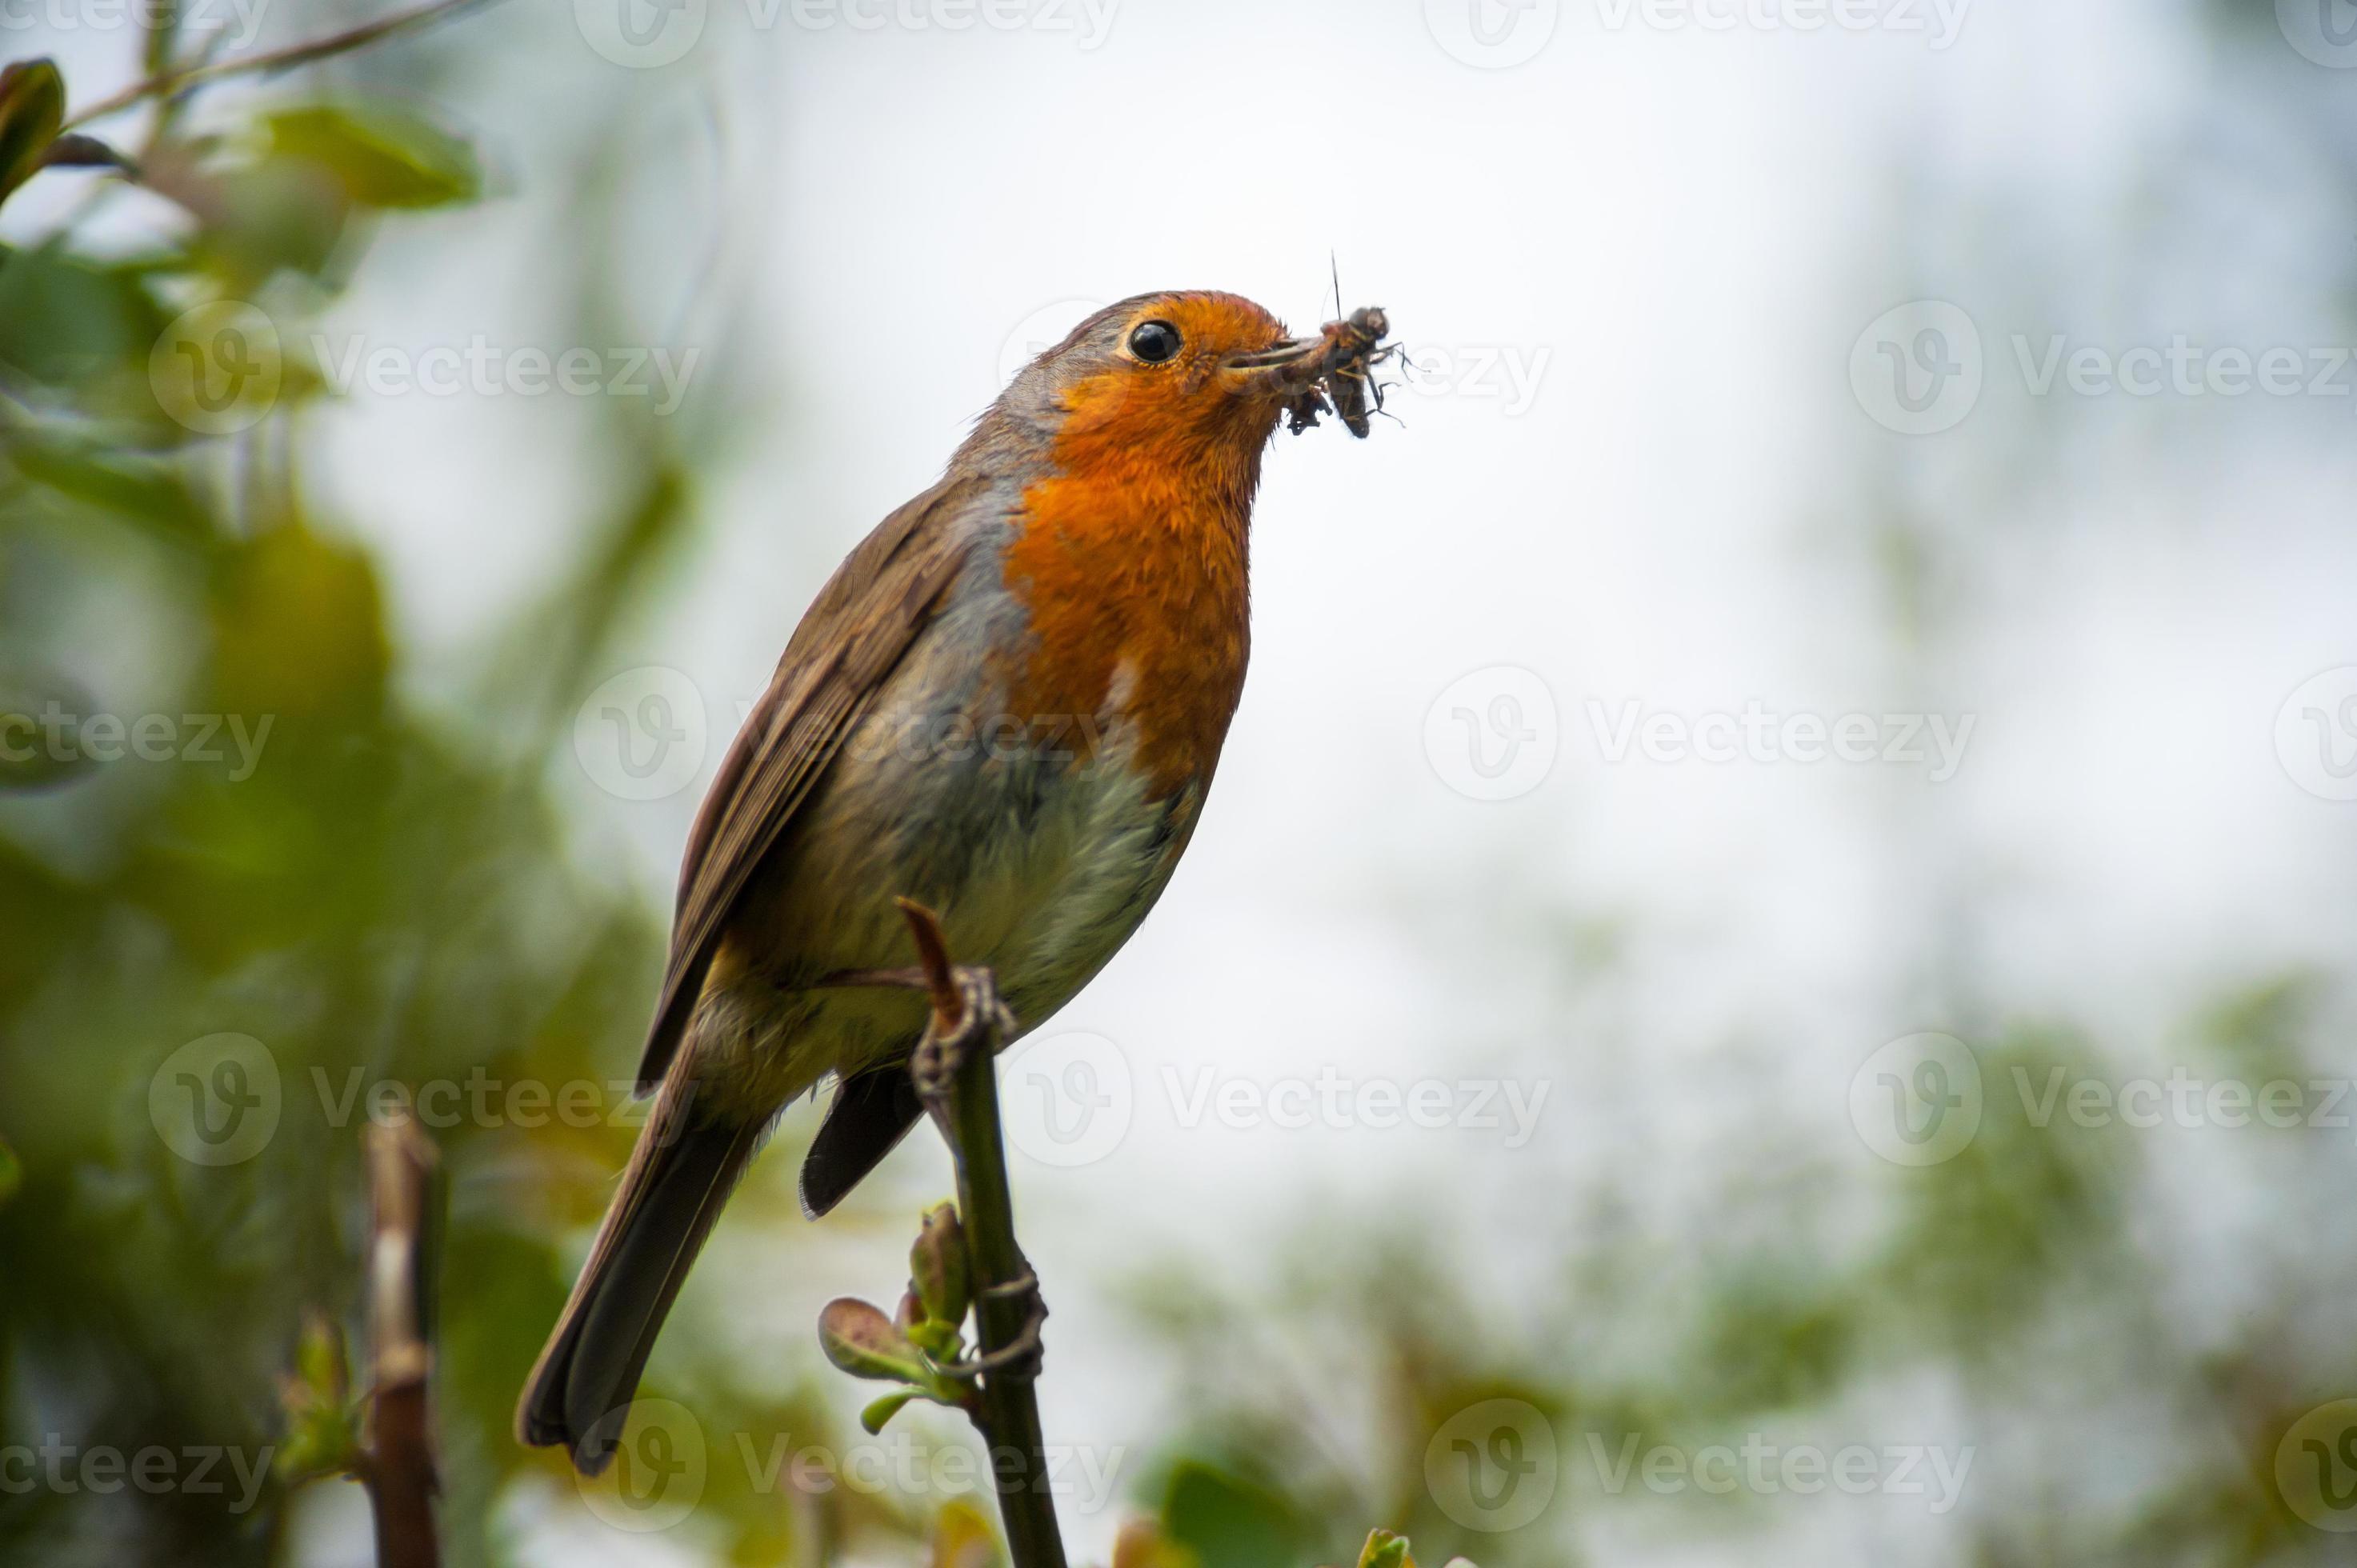 red robin bird eating an insect 721086 Stock Photo at Vecteezy